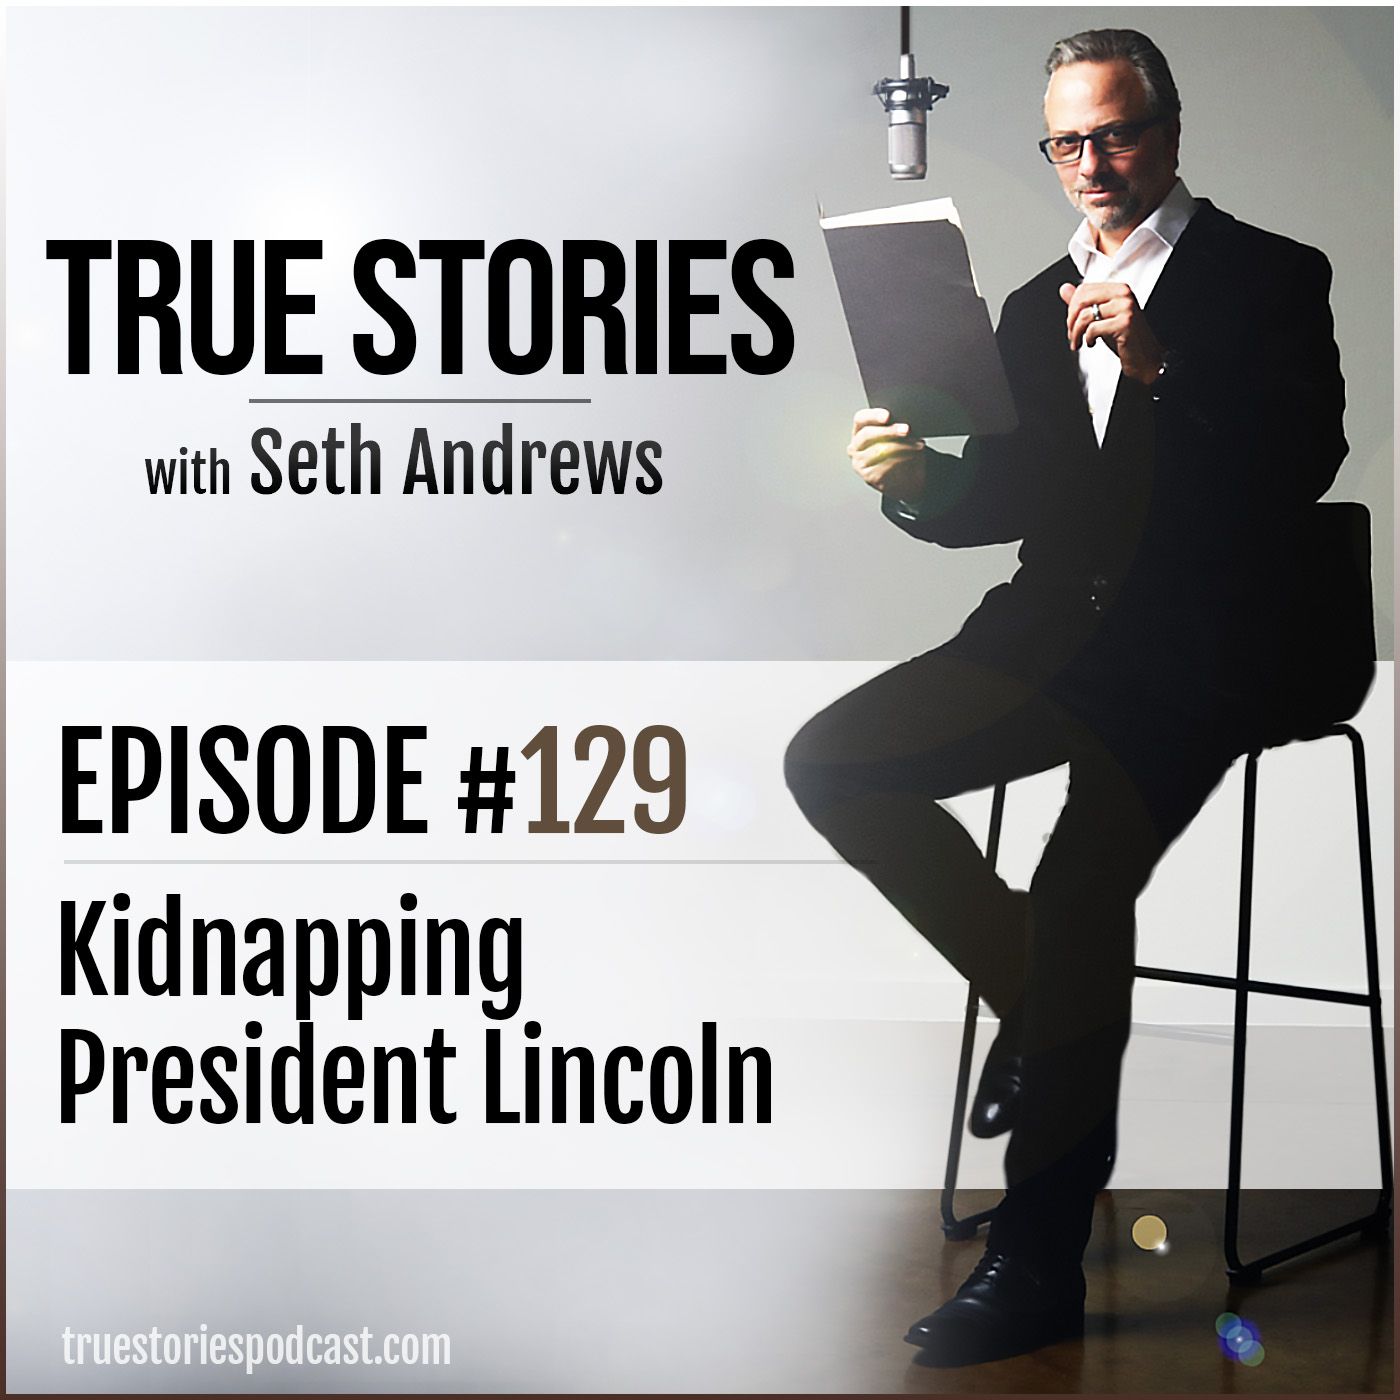 True Stories #129 - Kidnapping President Lincoln